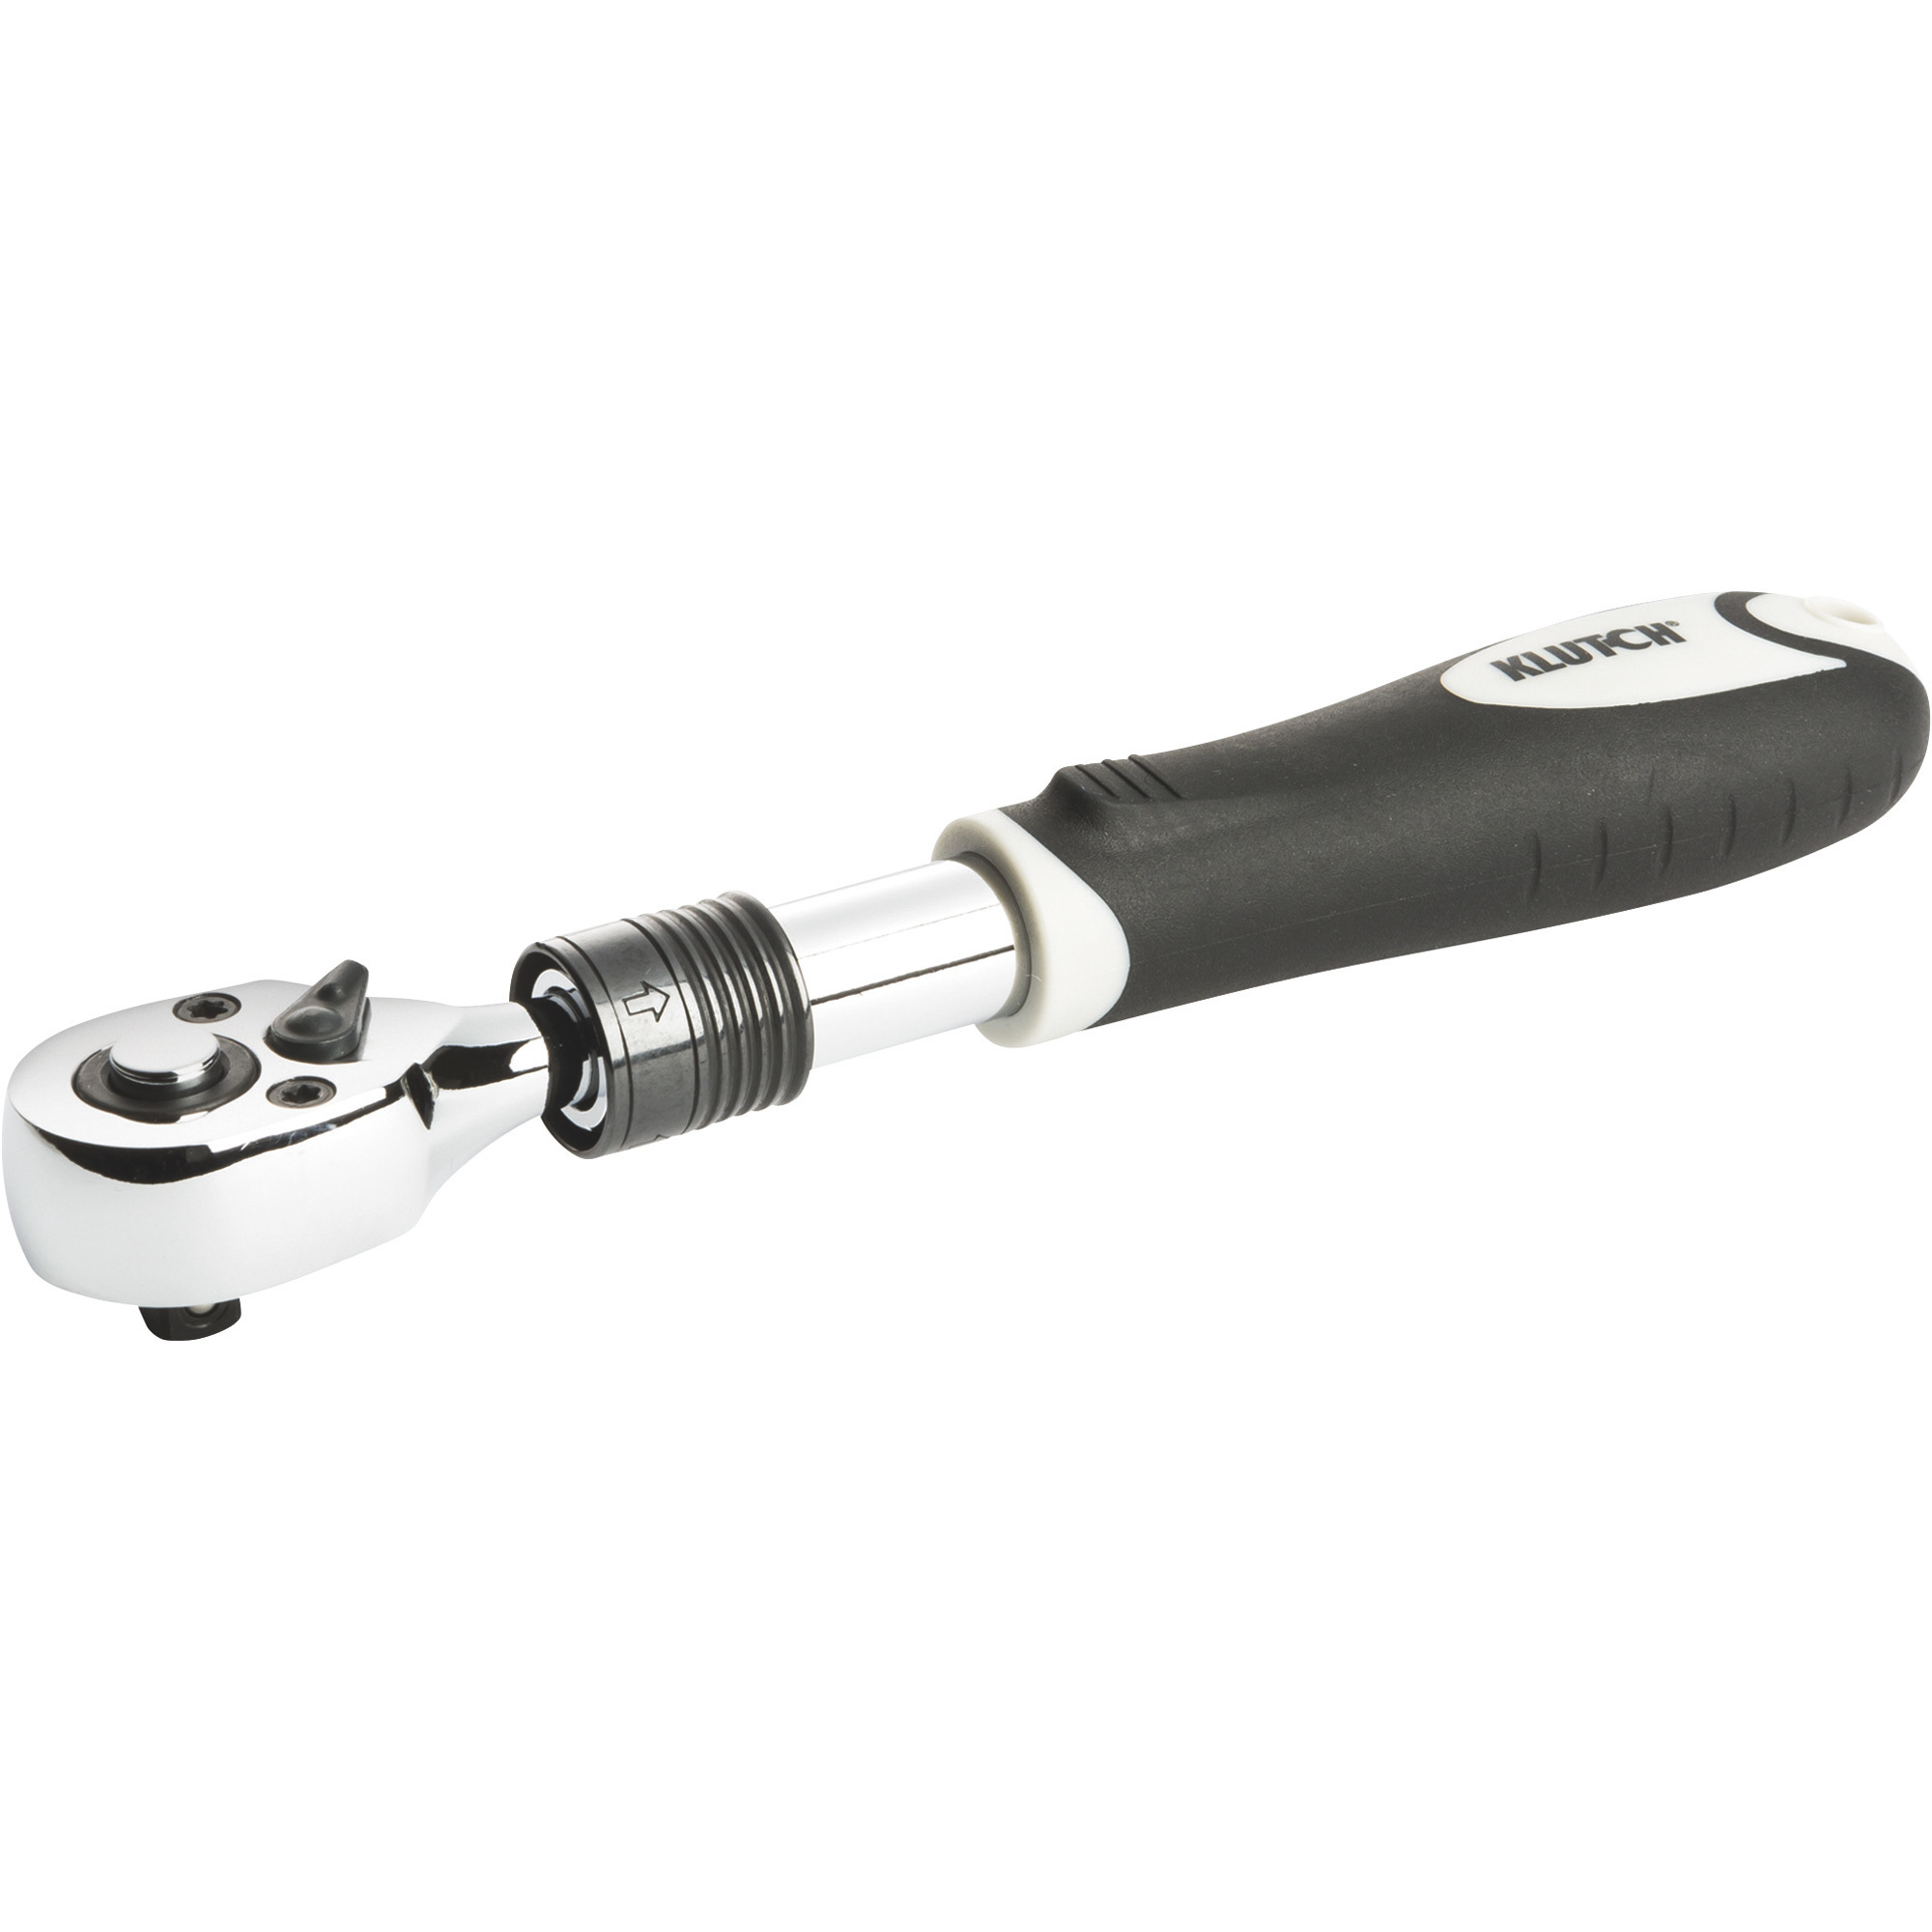 Klutch Extendable Ratchet, 1/4Inch Drive, 6 1/2Inch to 8 1/4Inch Range